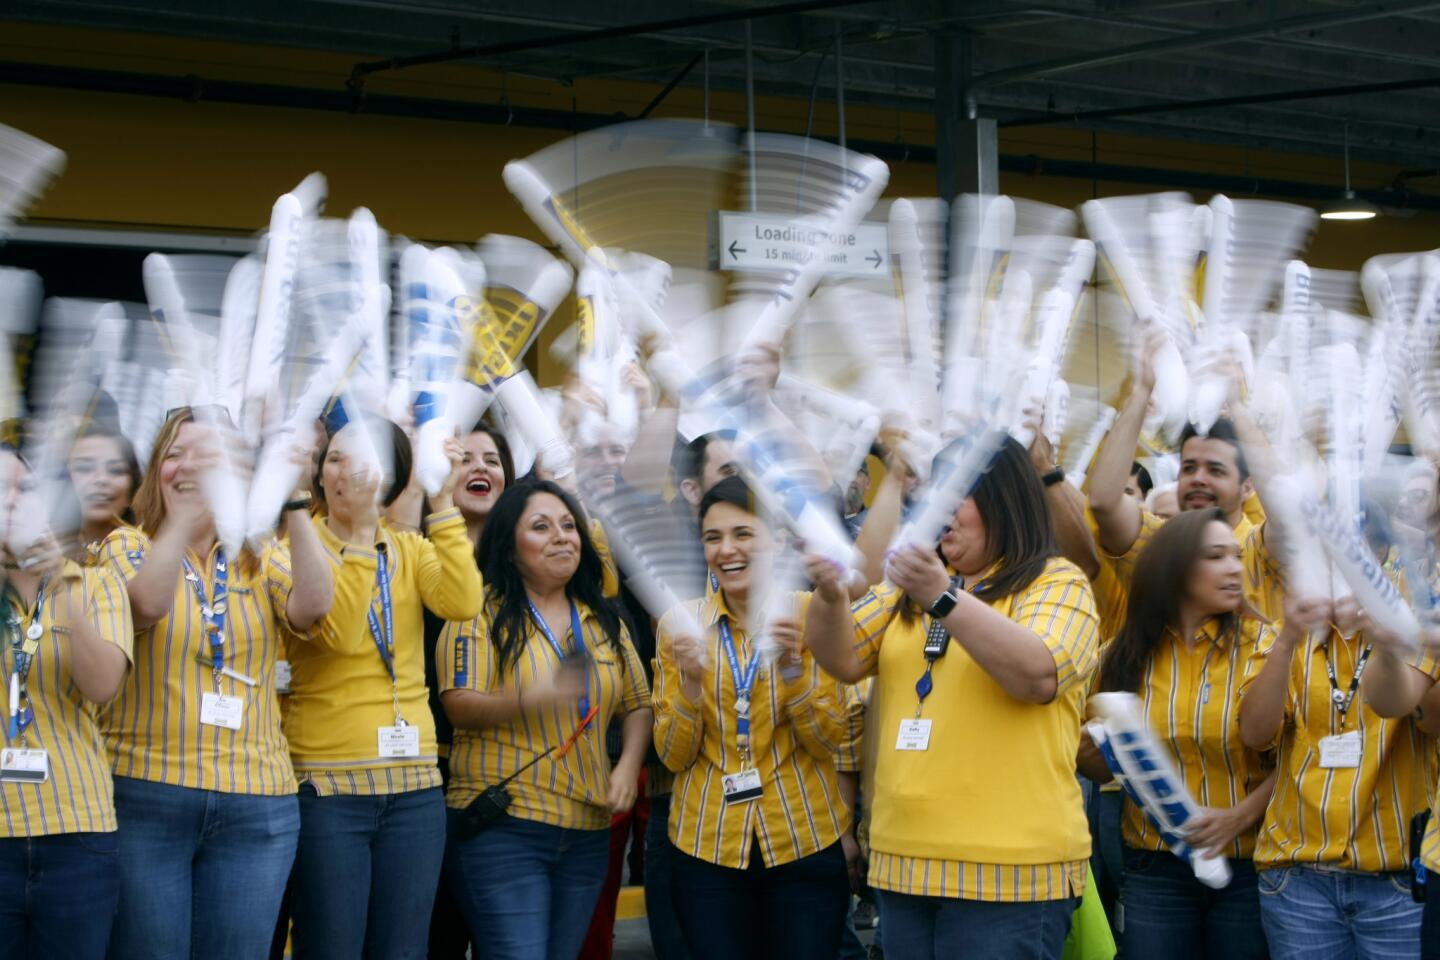 Photo Gallery: Largest Ikea store in North America opens in Burbank